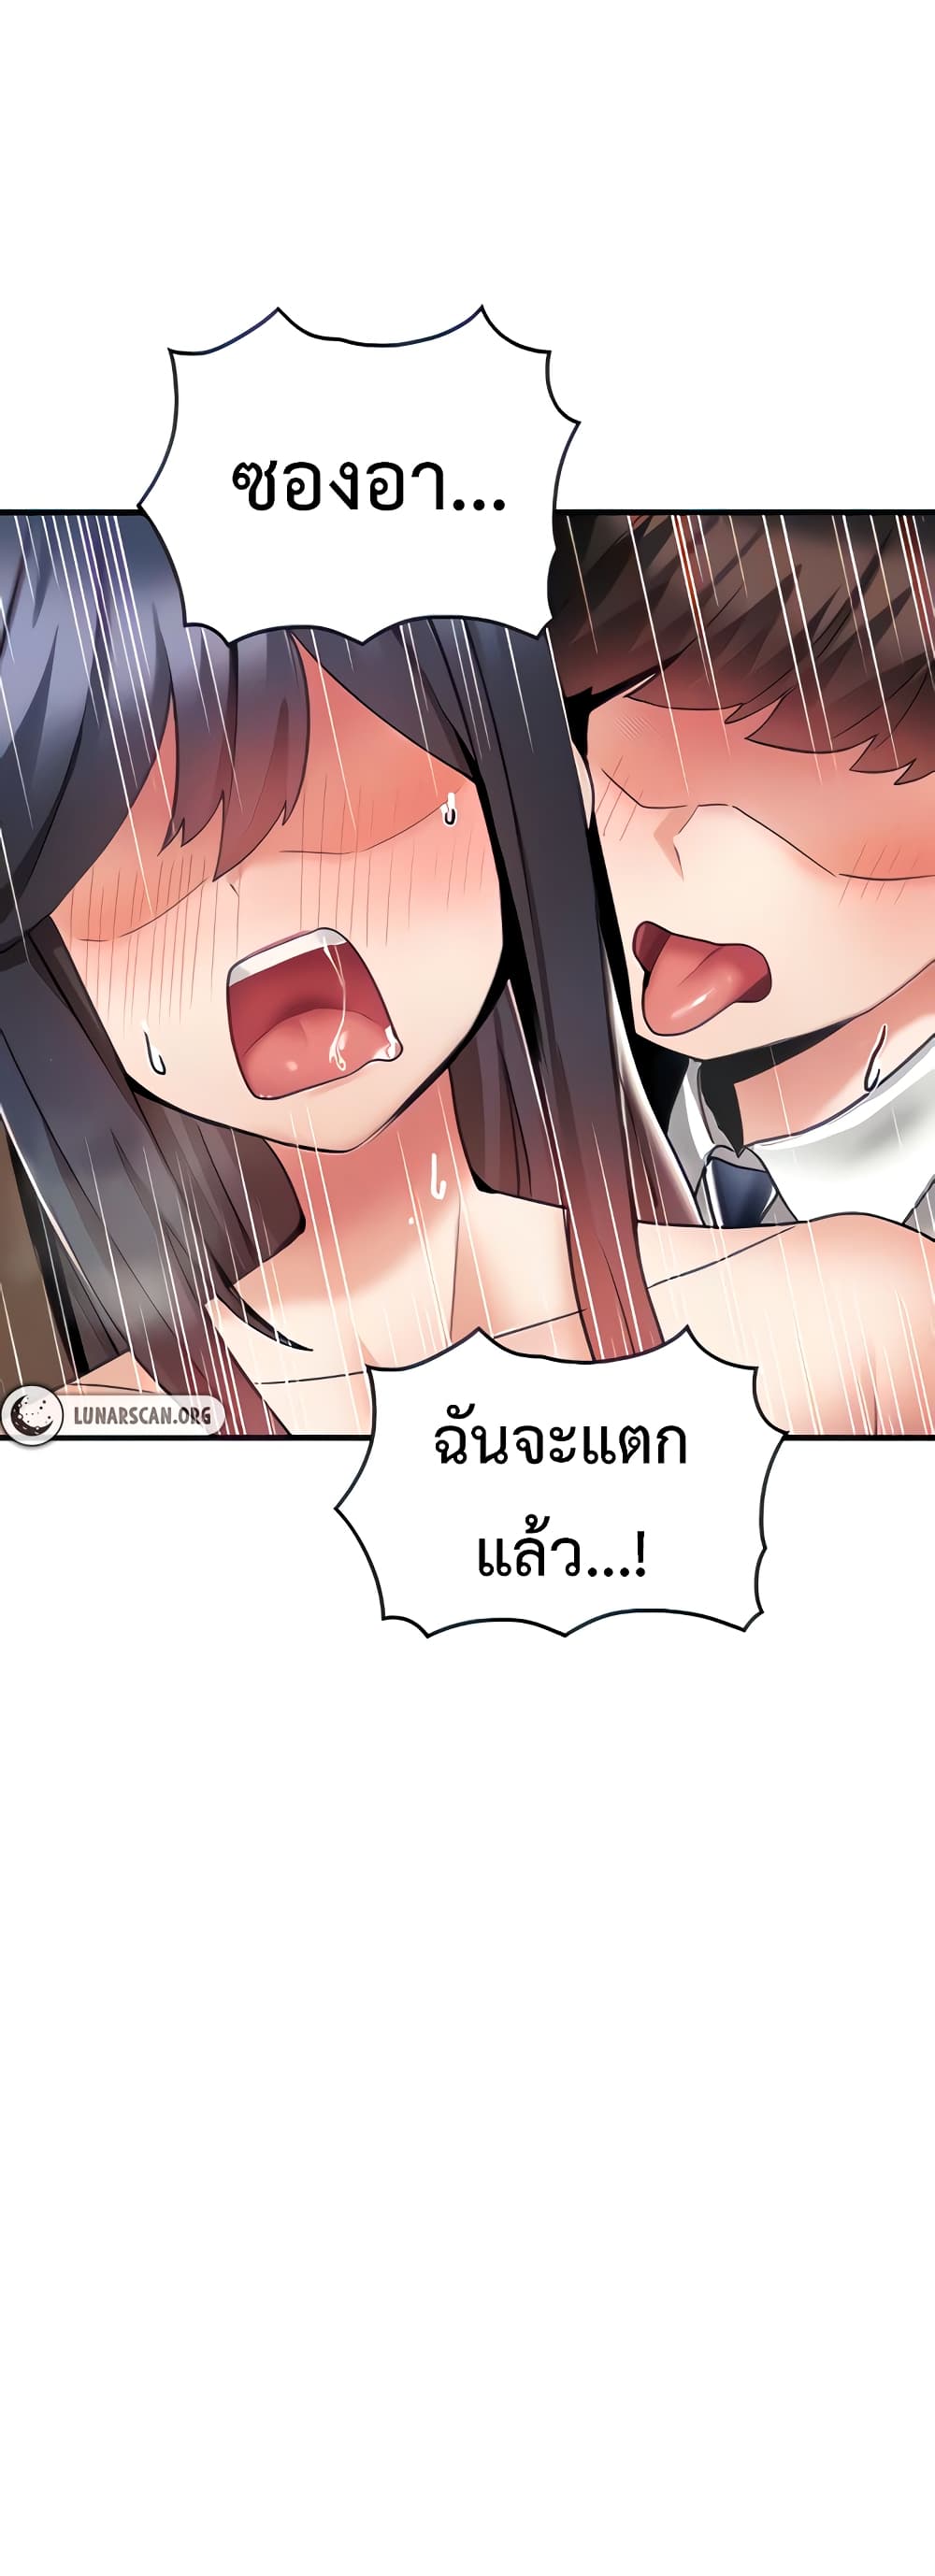 Relationship Reverse Button: Let’s Make Her Submissive 9 ภาพที่ 5